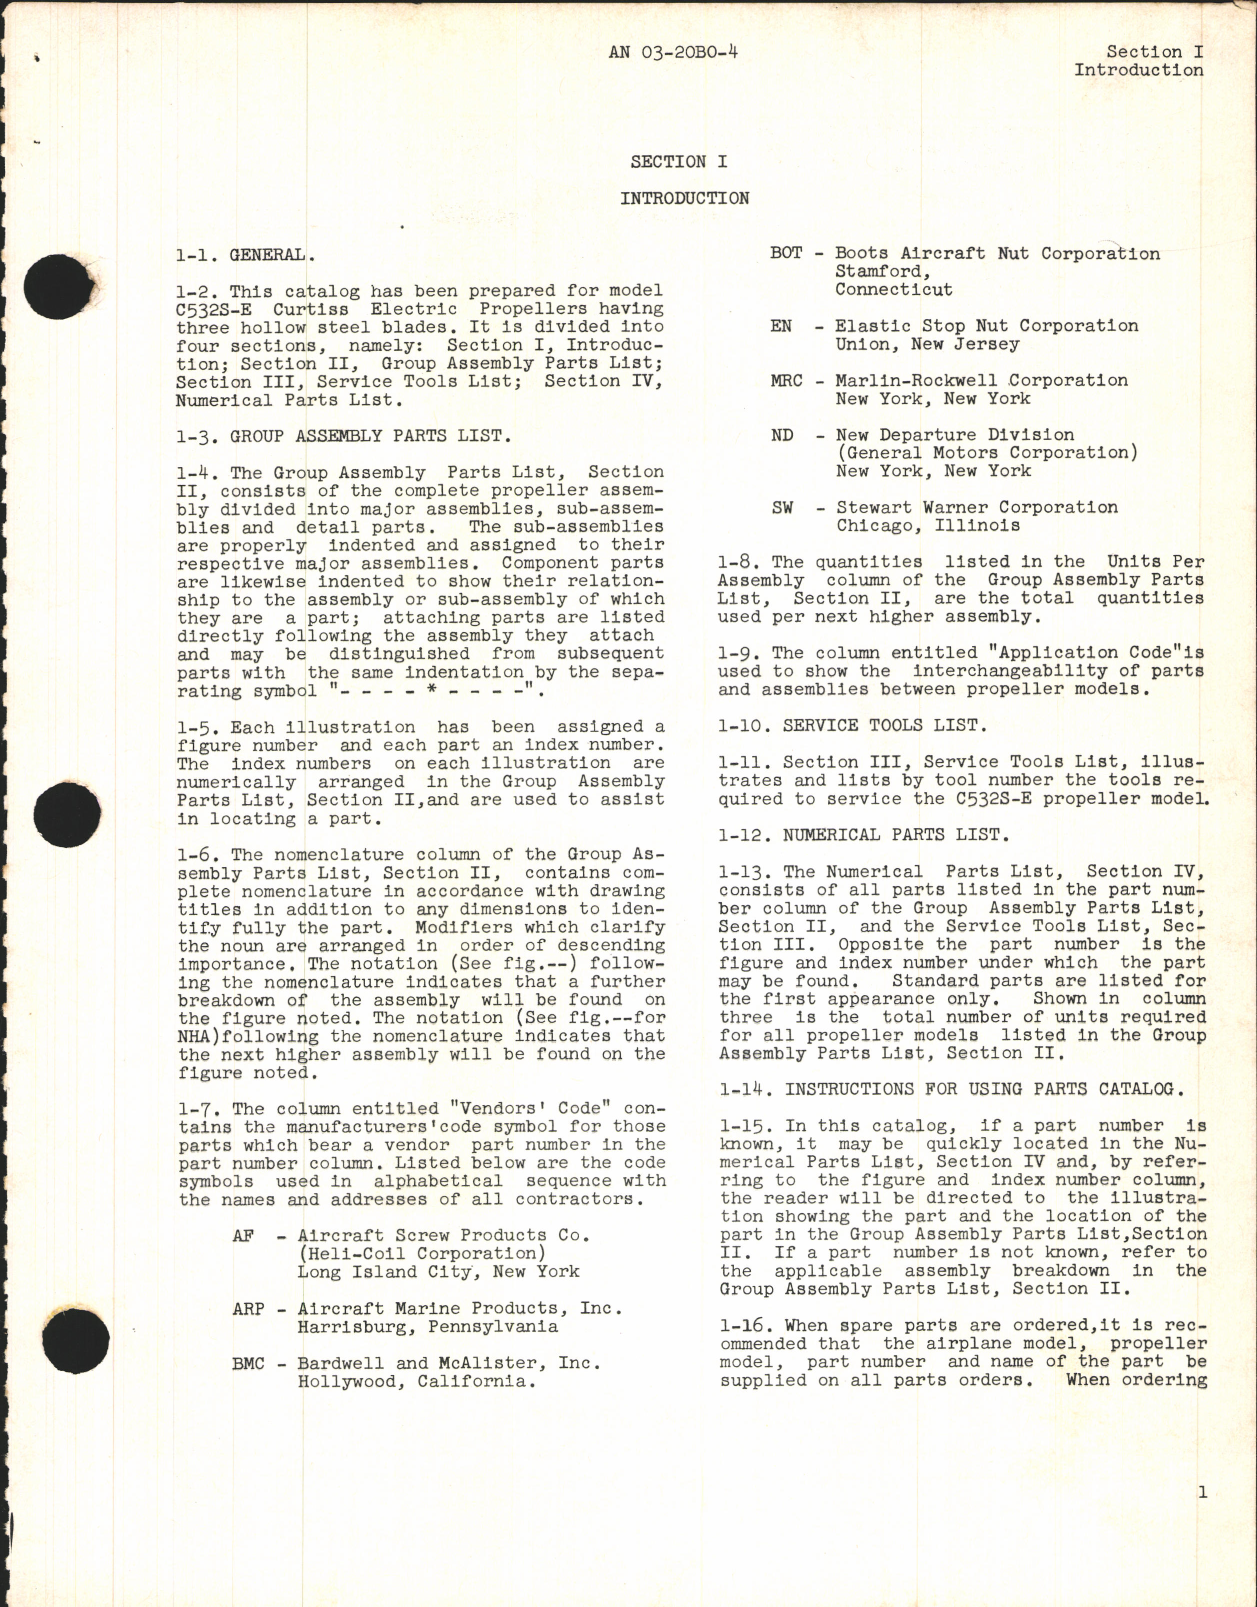 Sample page 5 from AirCorps Library document: Parts Catalog for Curtiss Electric Propeller Model C532S-E